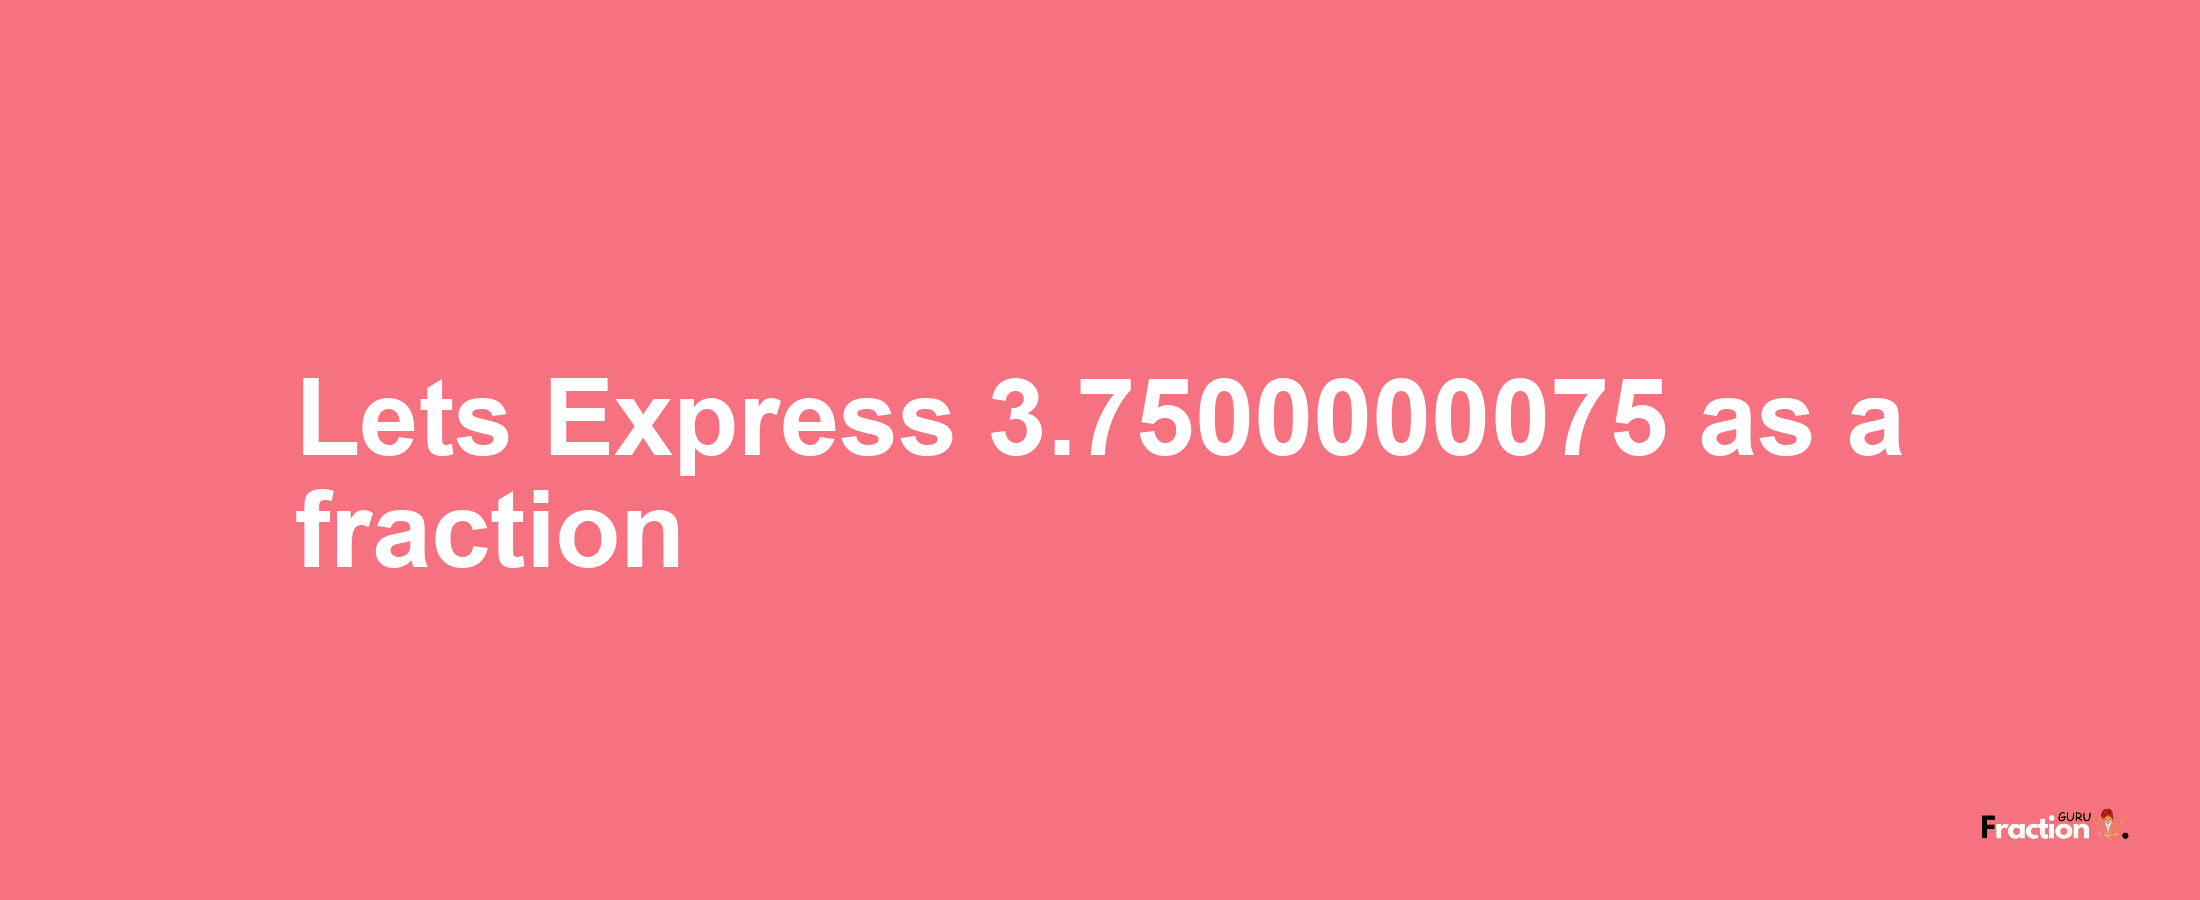 Lets Express 3.7500000075 as afraction